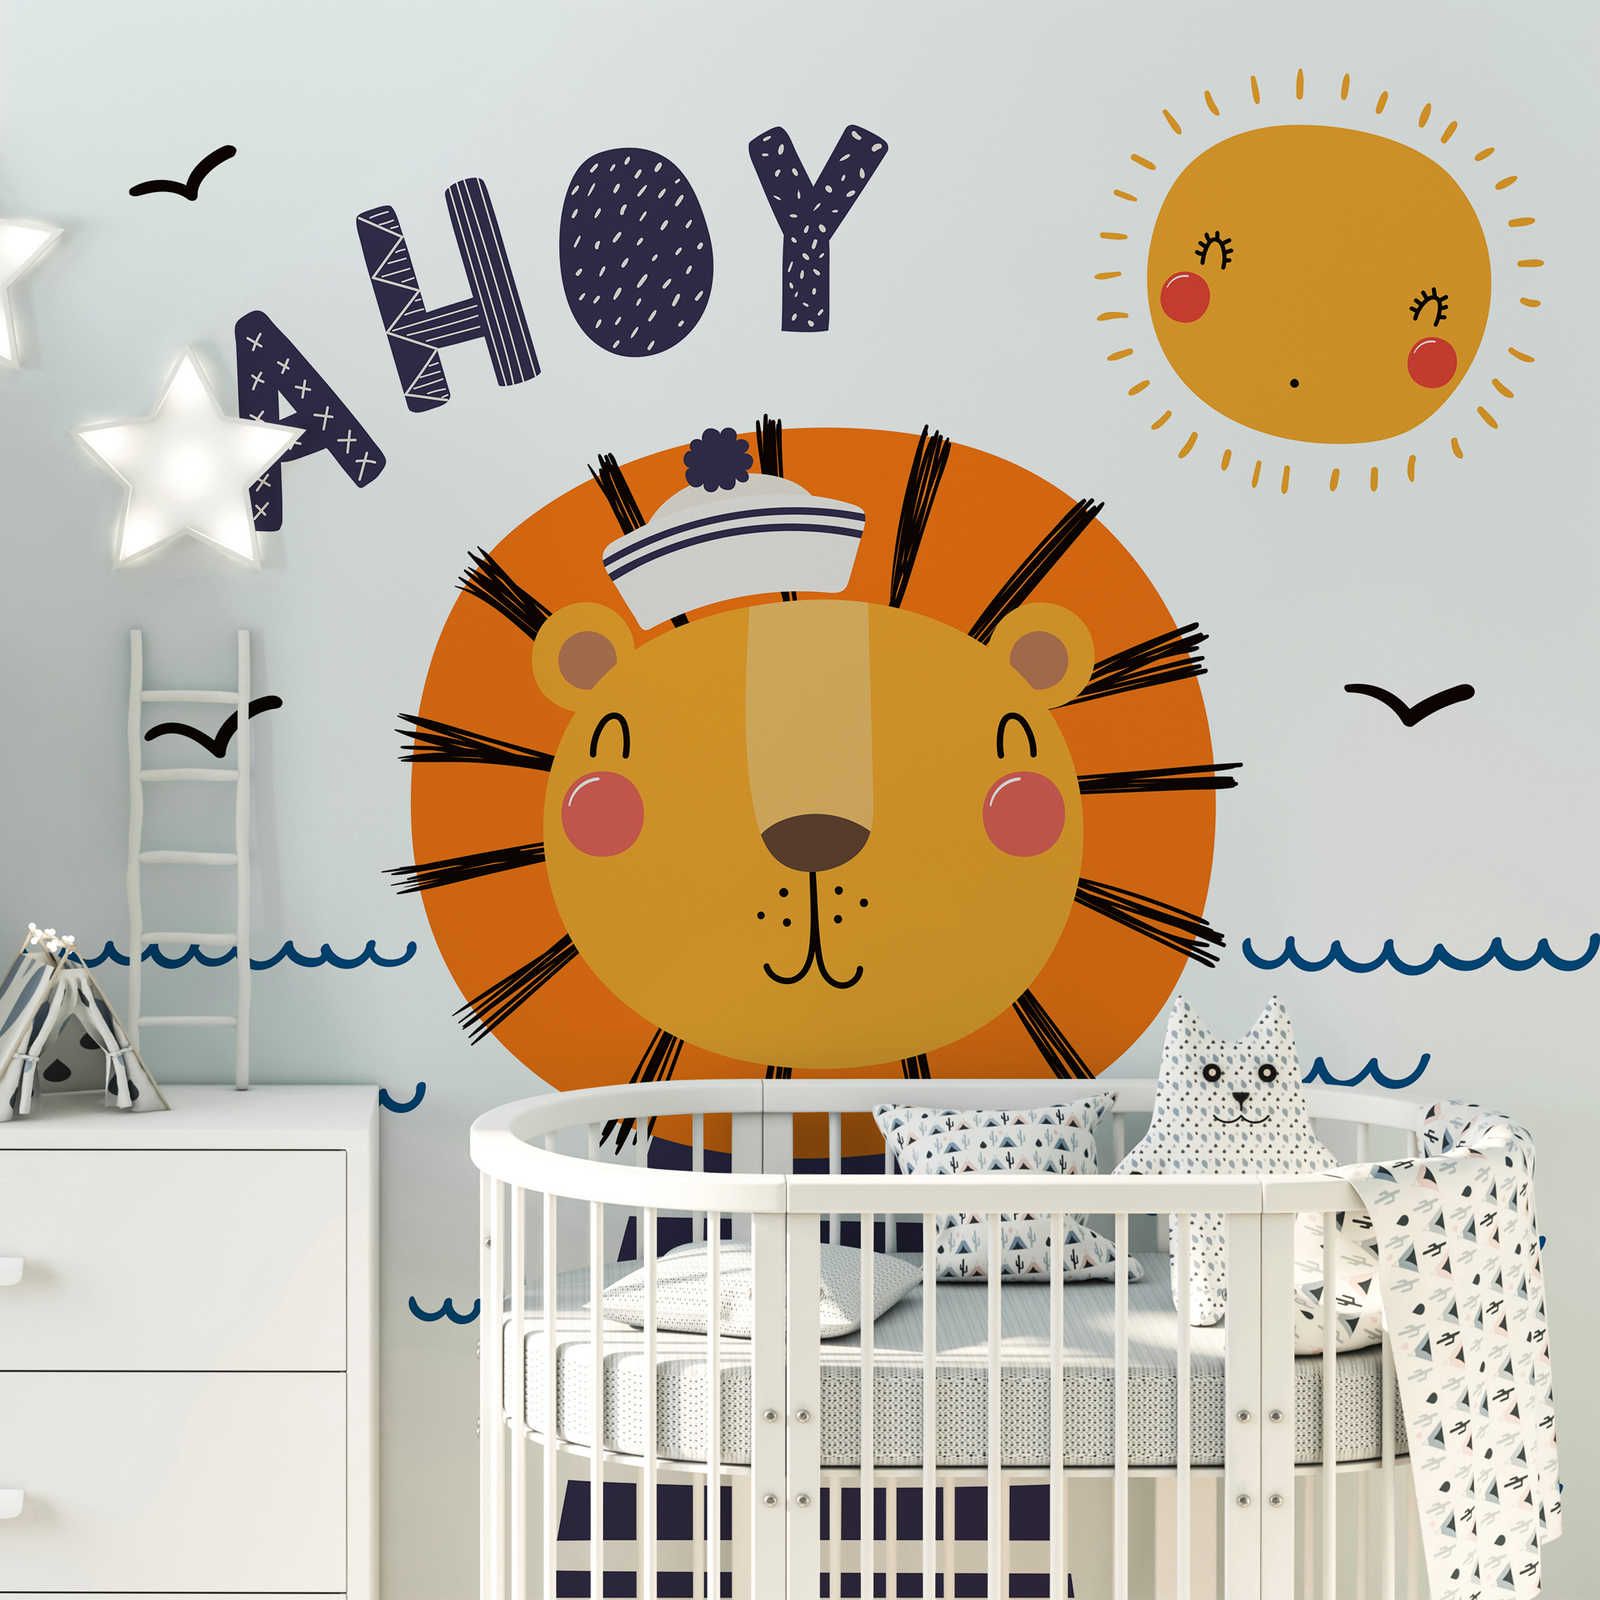         Photo wallpaper for children's room with lion pirate - Smooth & slightly shiny non-woven
    